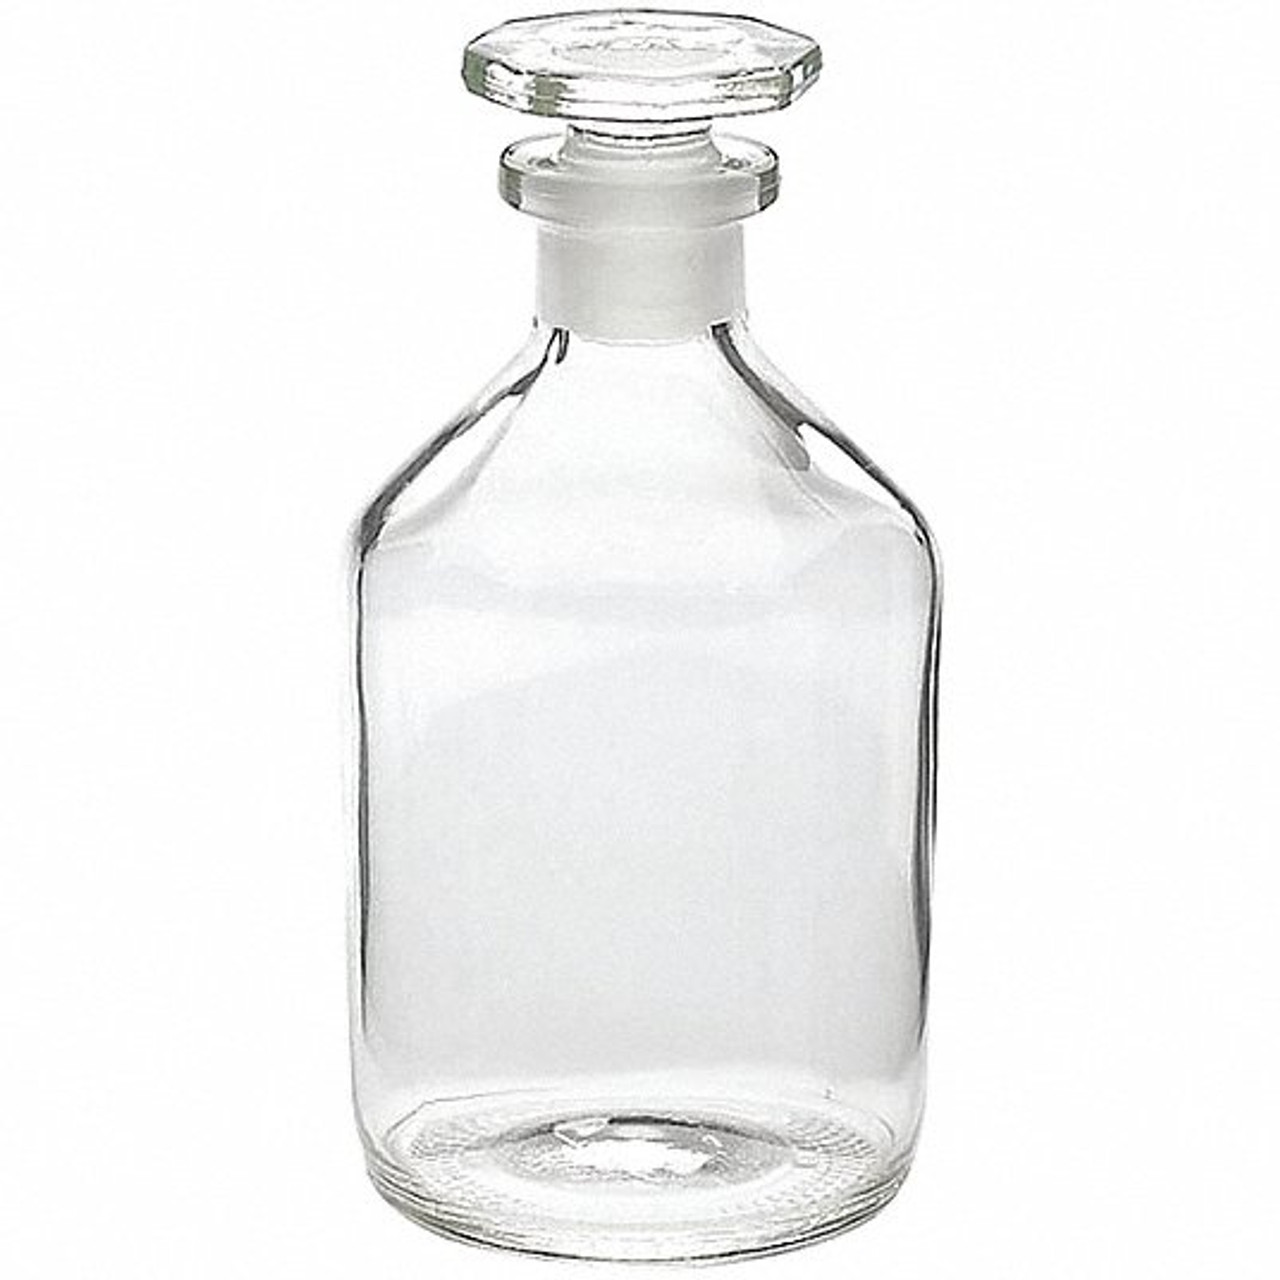 https://cdn11.bigcommerce.com/s-48gxyyxkag/images/stencil/1280x1280/products/34568/68872/Wheaton_215240_Narrow_Mouth_Reagent_Bottle_Clear_Glass_1000mL_-_B5561-4__48640.1661798428.jpg?c=1